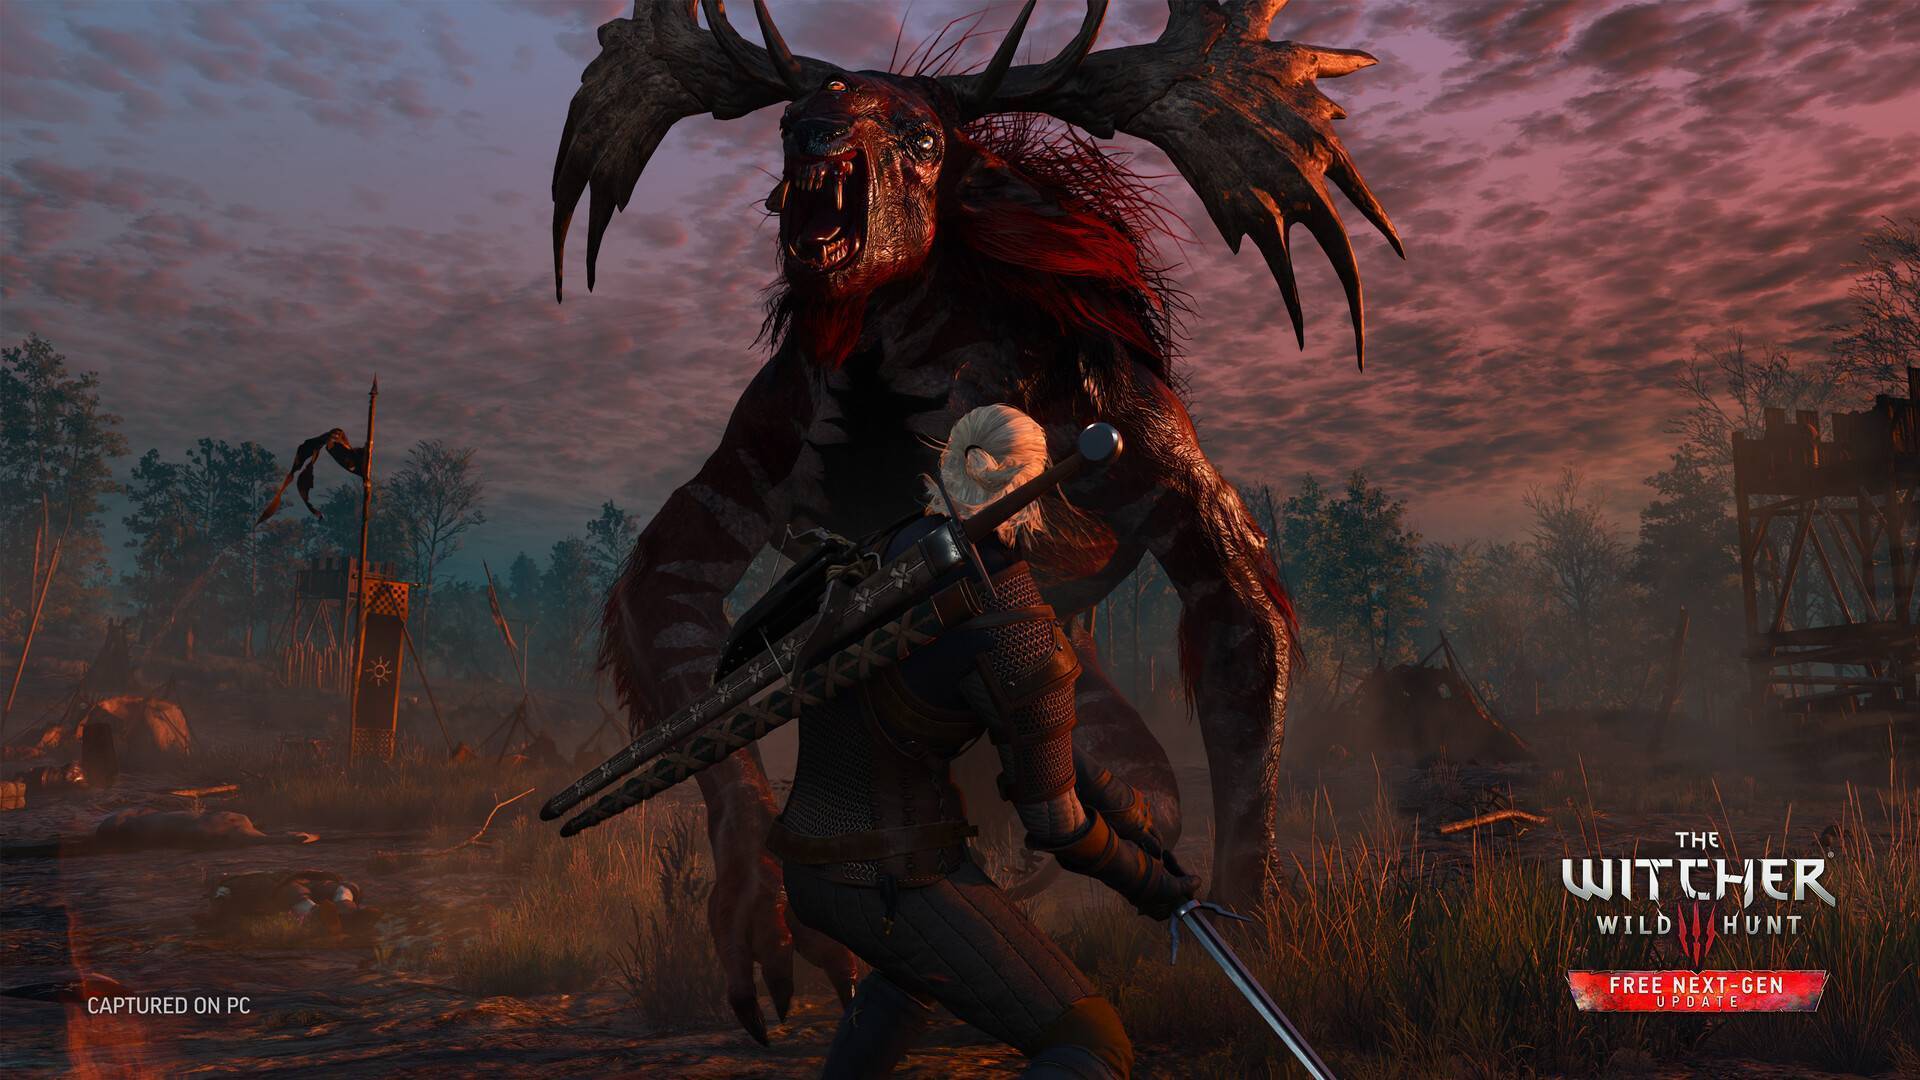 The Witcher 3 Wild Hunt (PS5) cheap - Price of $12.07